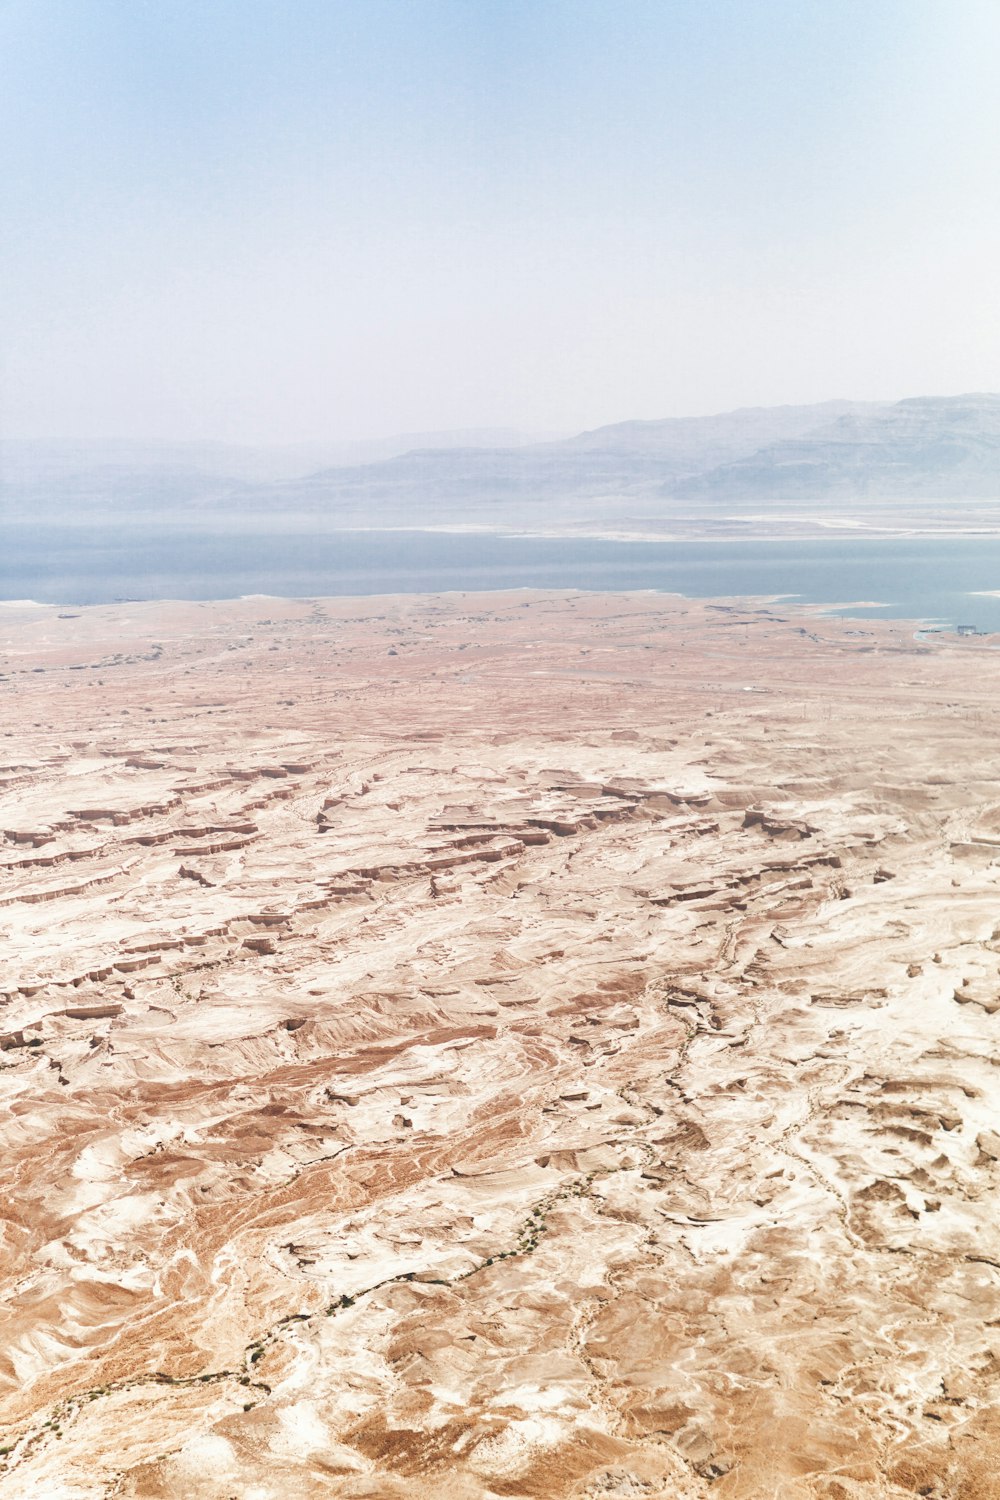 an aerial view of a desert with a body of water in the distance